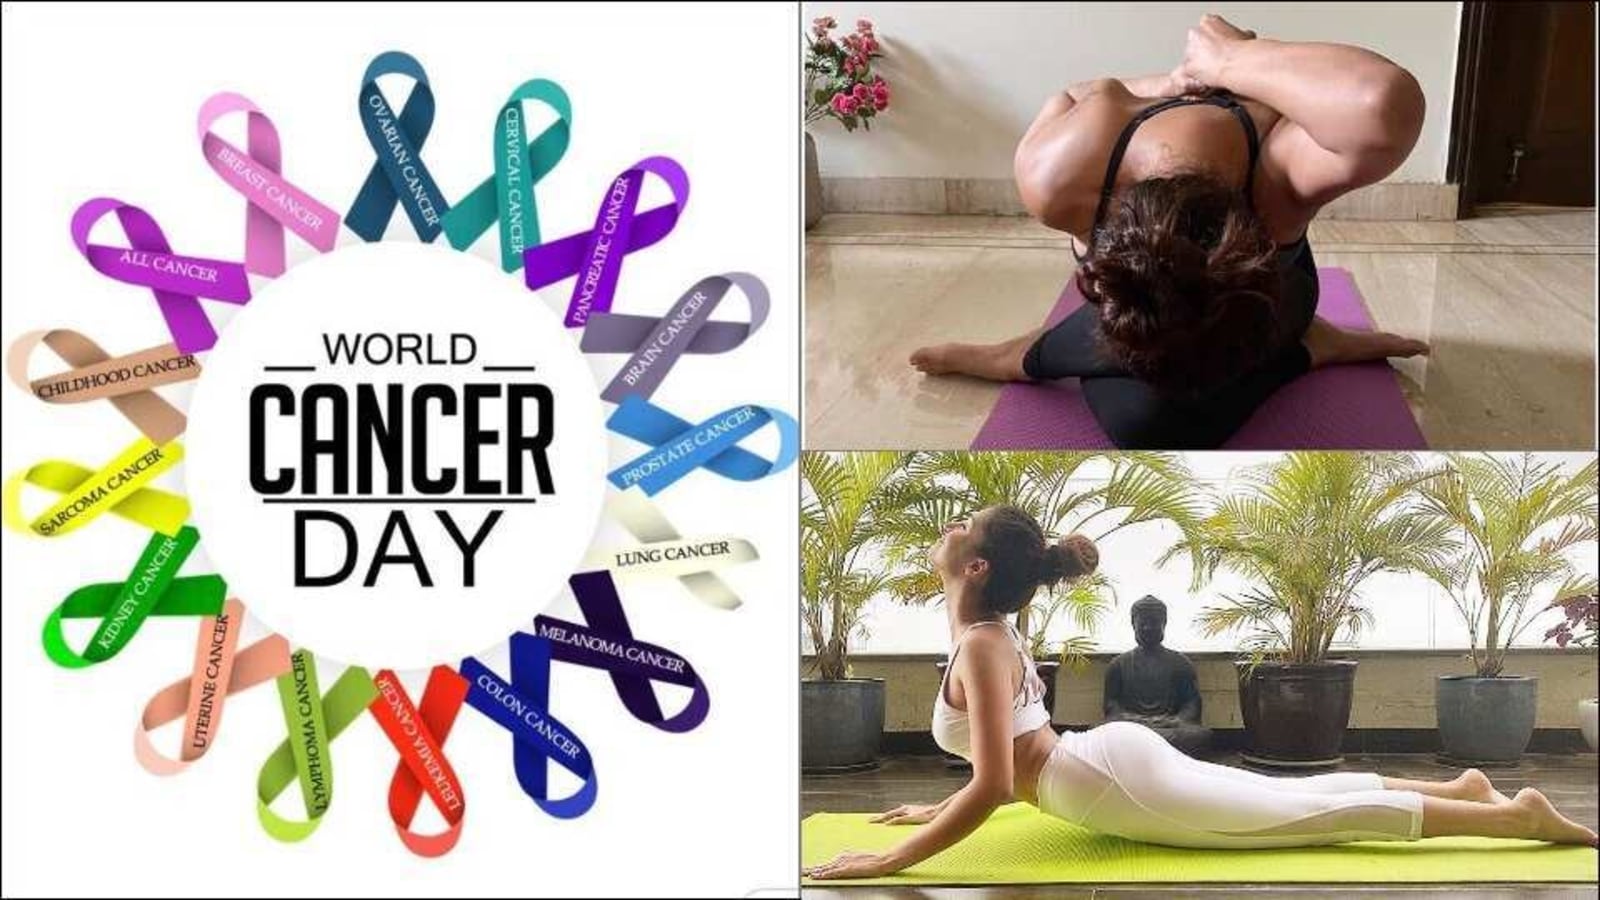 Yoga for breast cancer: Benefits, poses, risks, and more